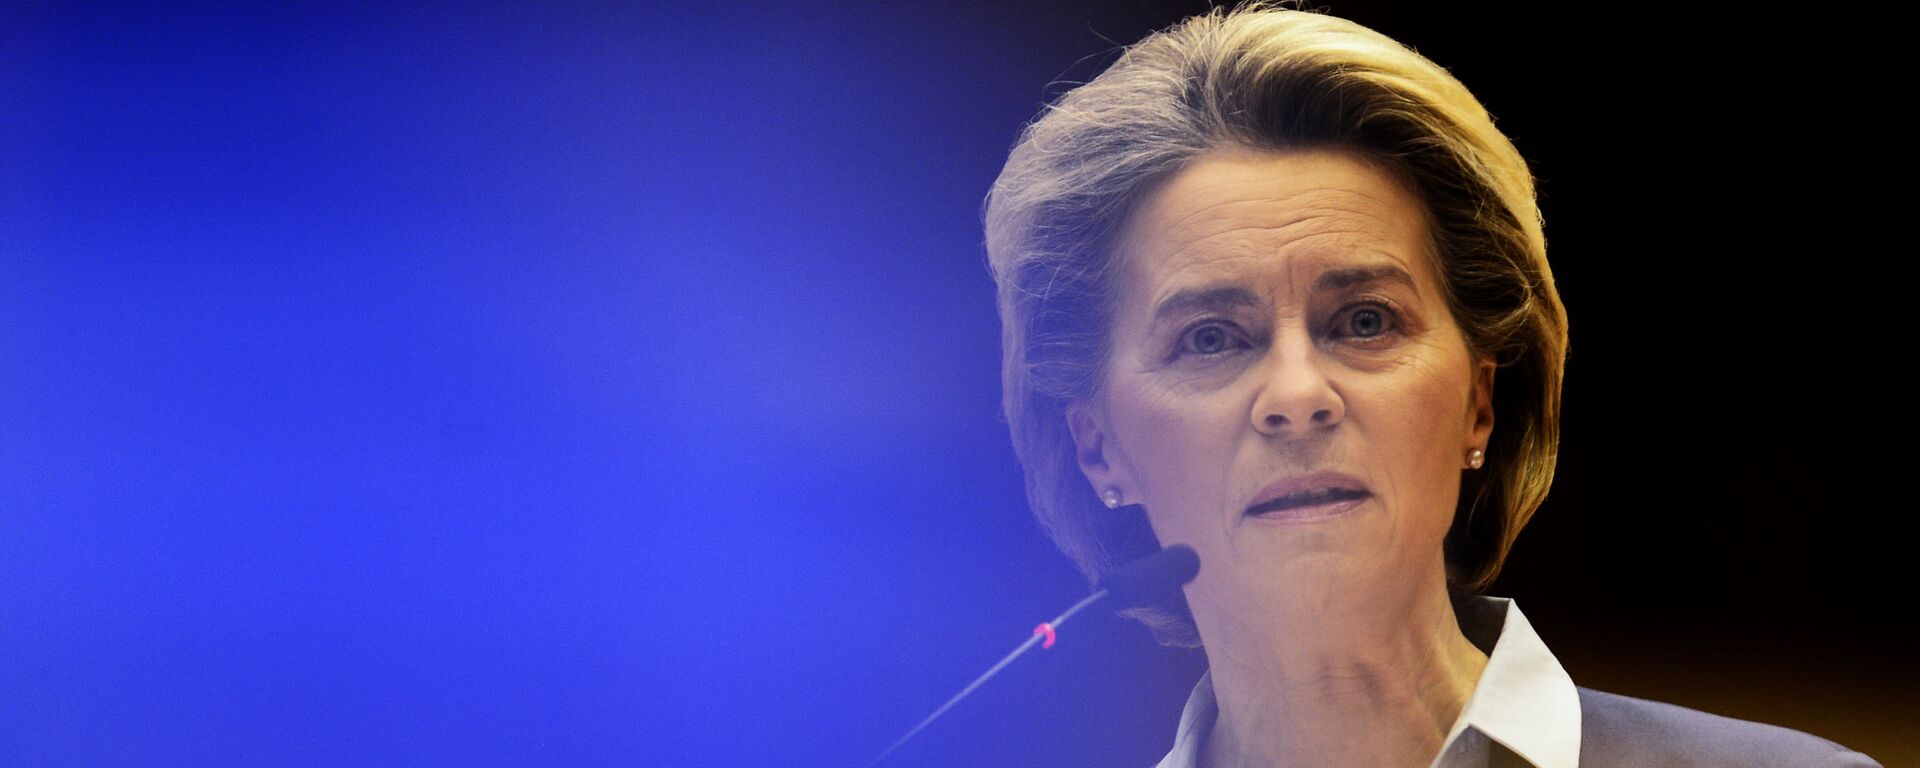 European Commission President Ursula von der Leyen speaks during a debate on the united EU approach to COVID-19 vaccinations at the European Parliament in Brussels, Wednesday, Feb. 10, 2021 - Sputnik International, 1920, 07.09.2022